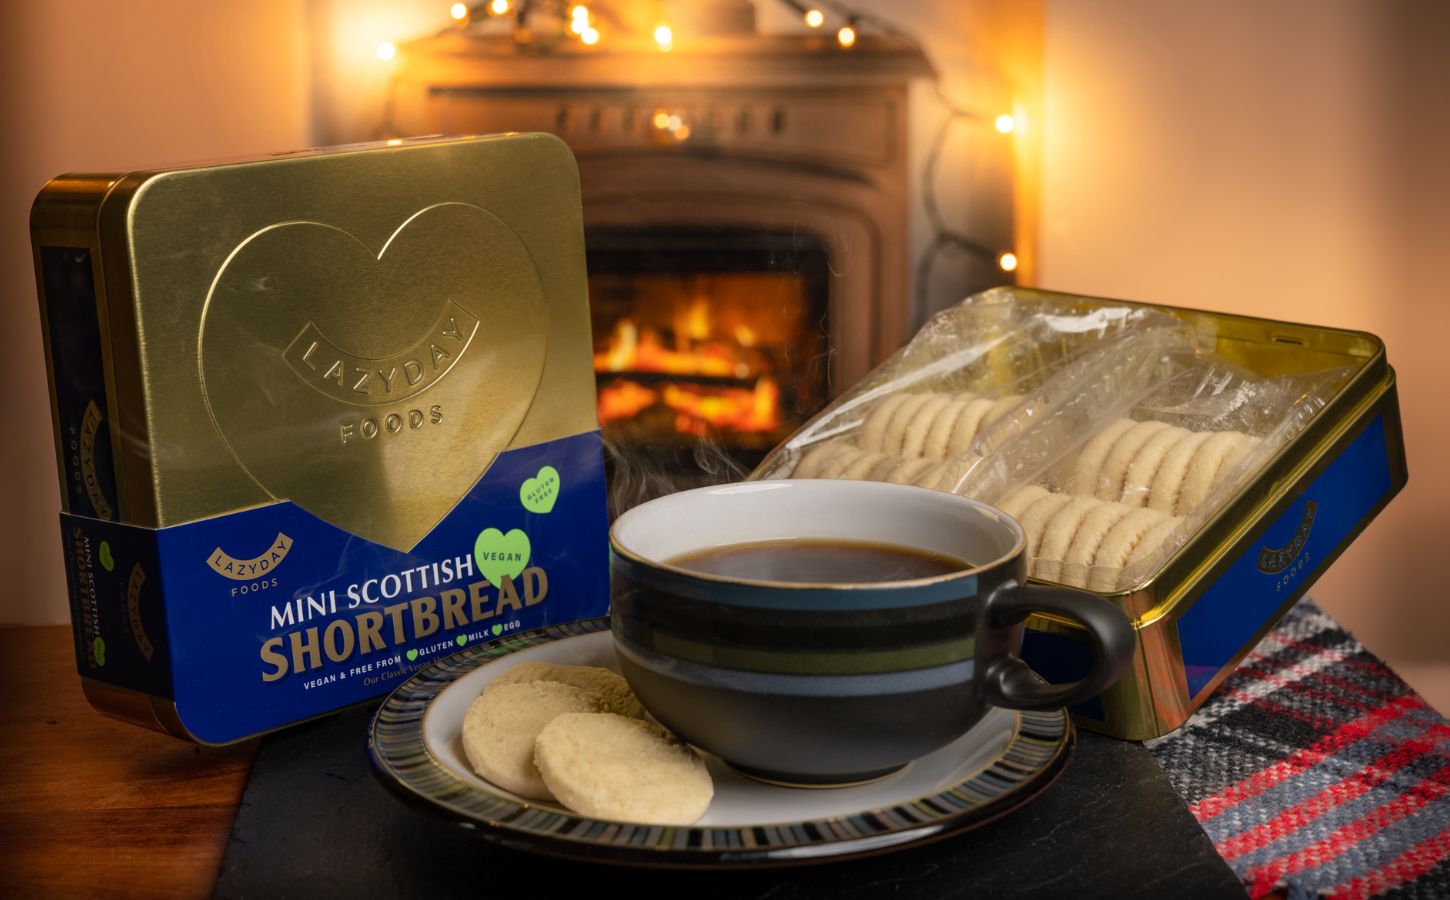 A vegan shortbread tin from Lazy Day Foods